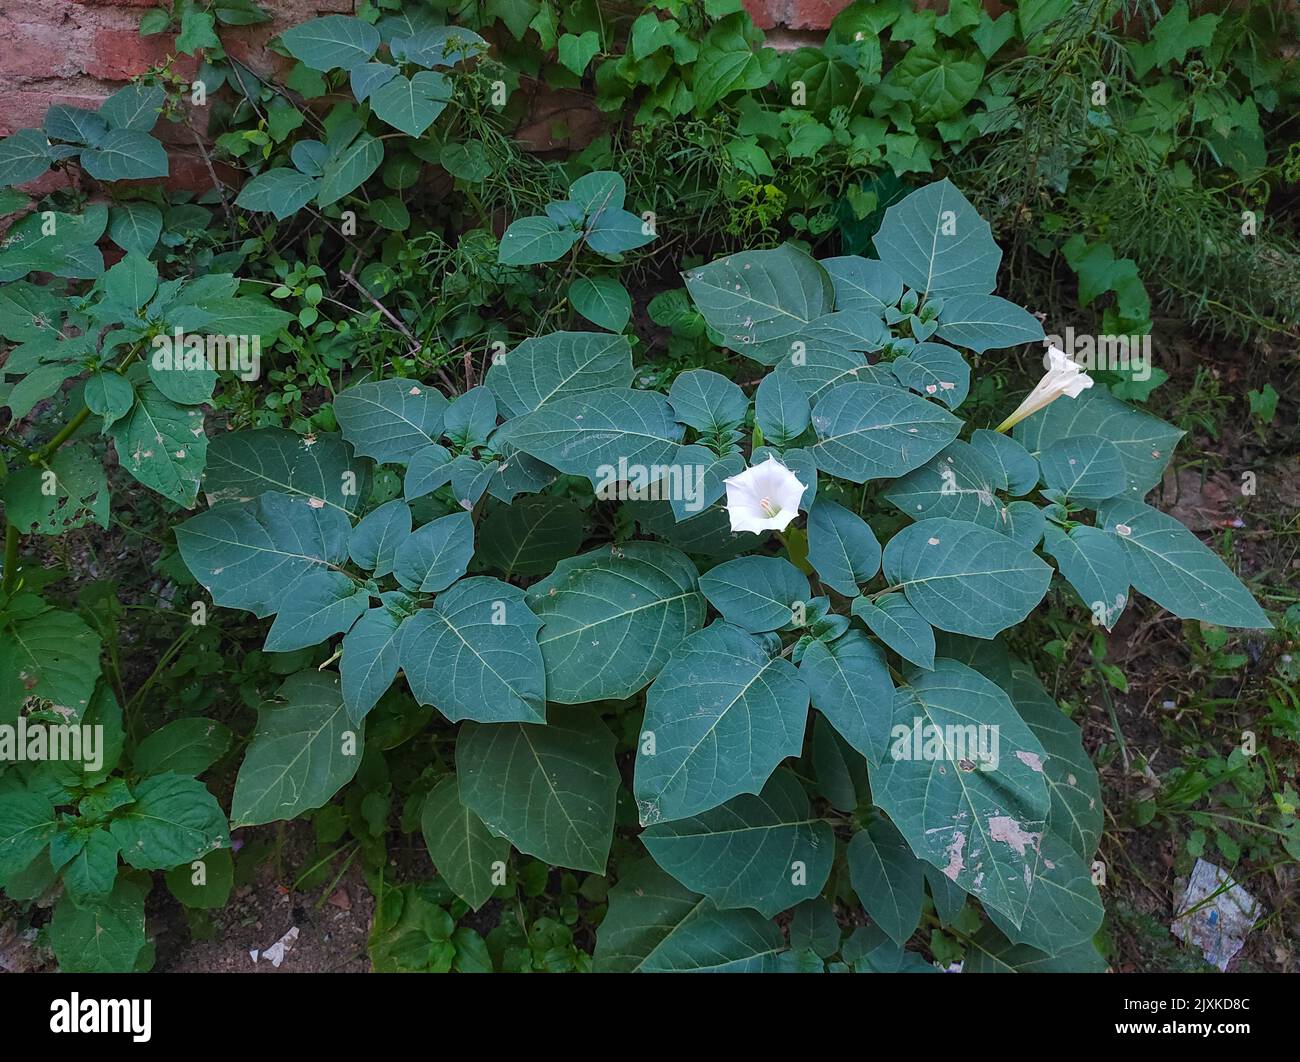 Safed Dhatura Prickly Burr Recurved Thorn Apple Downy Thorn apple Indian Apple Stinkweed Flower Plant Photo Selective Focus Stock Photo